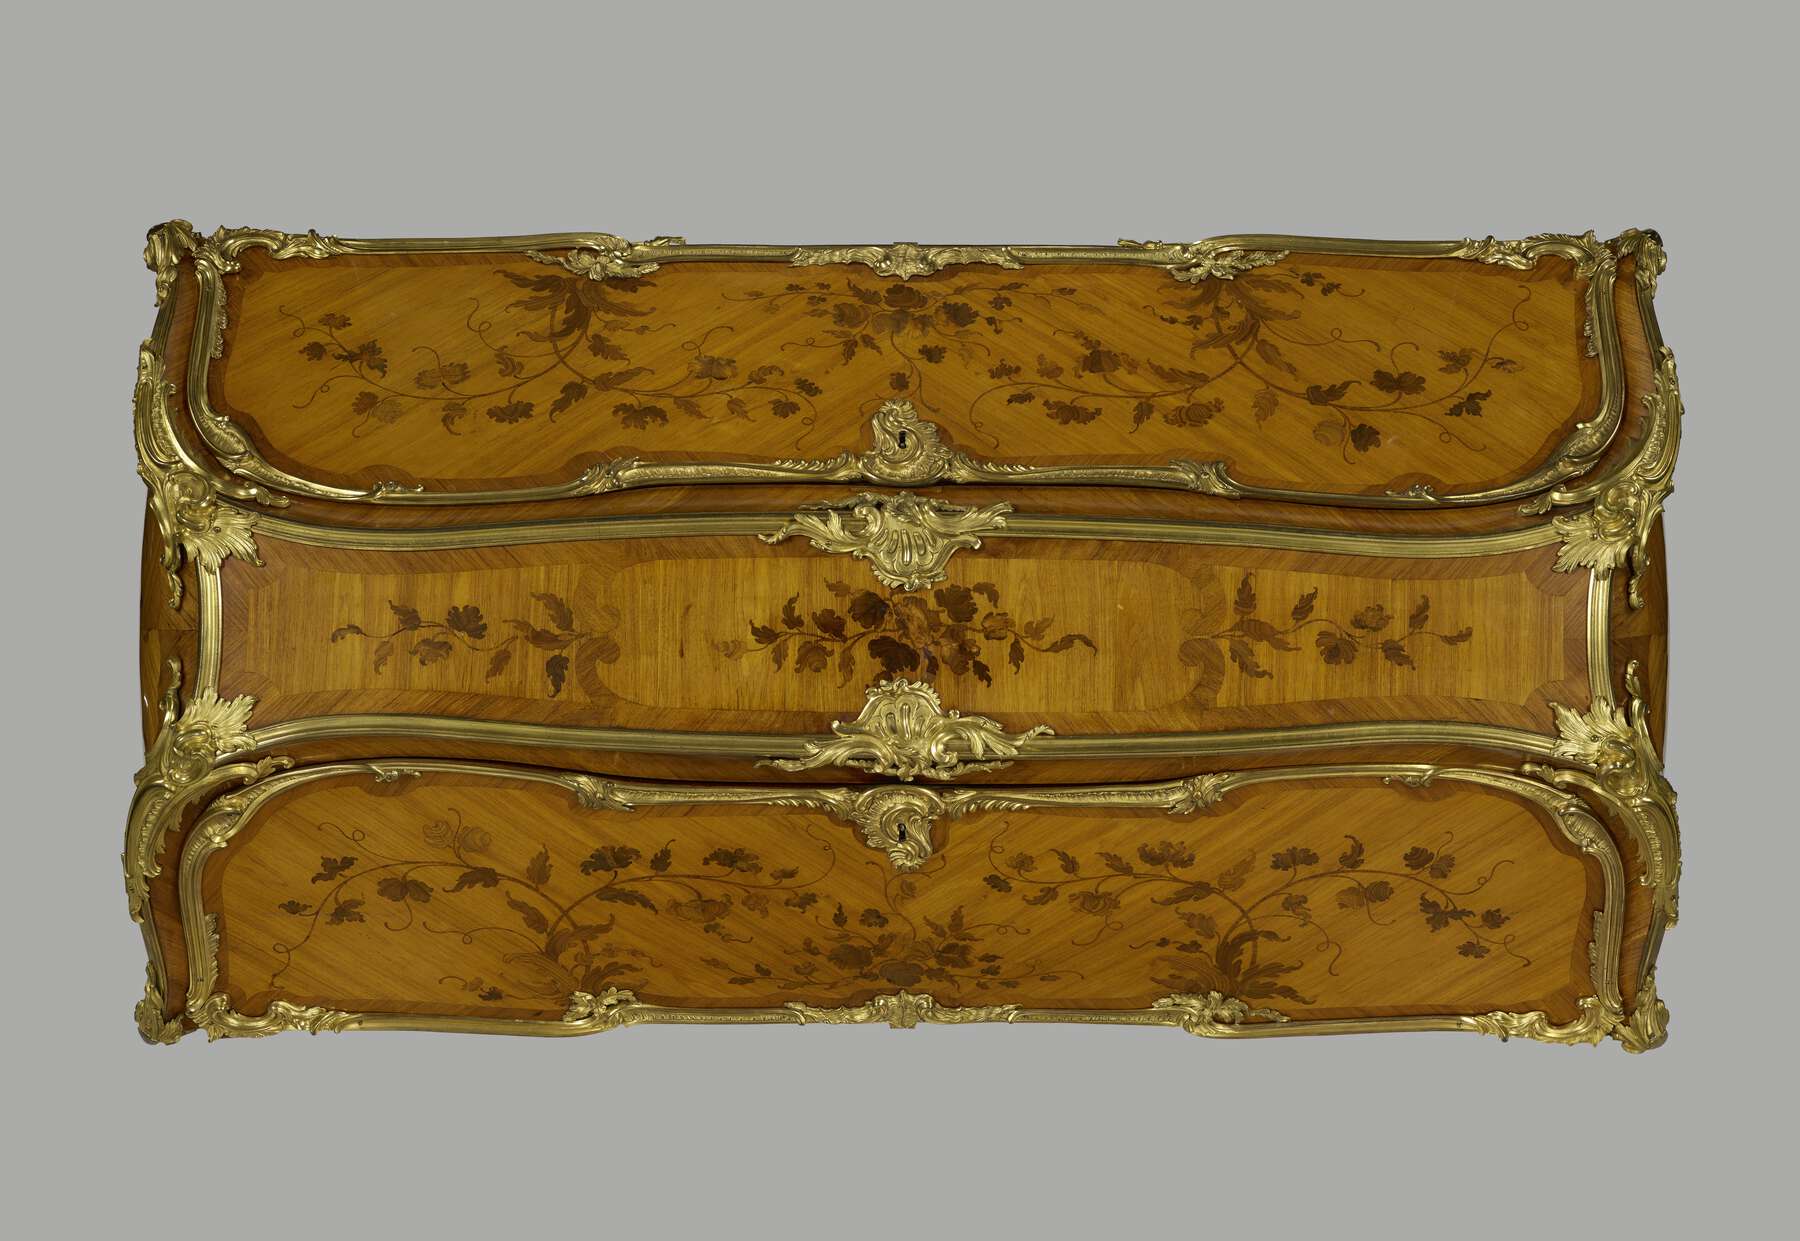 desk as seen from above, highlighting the symmetry of the veneer, marquetry, and gilt bronze mounts